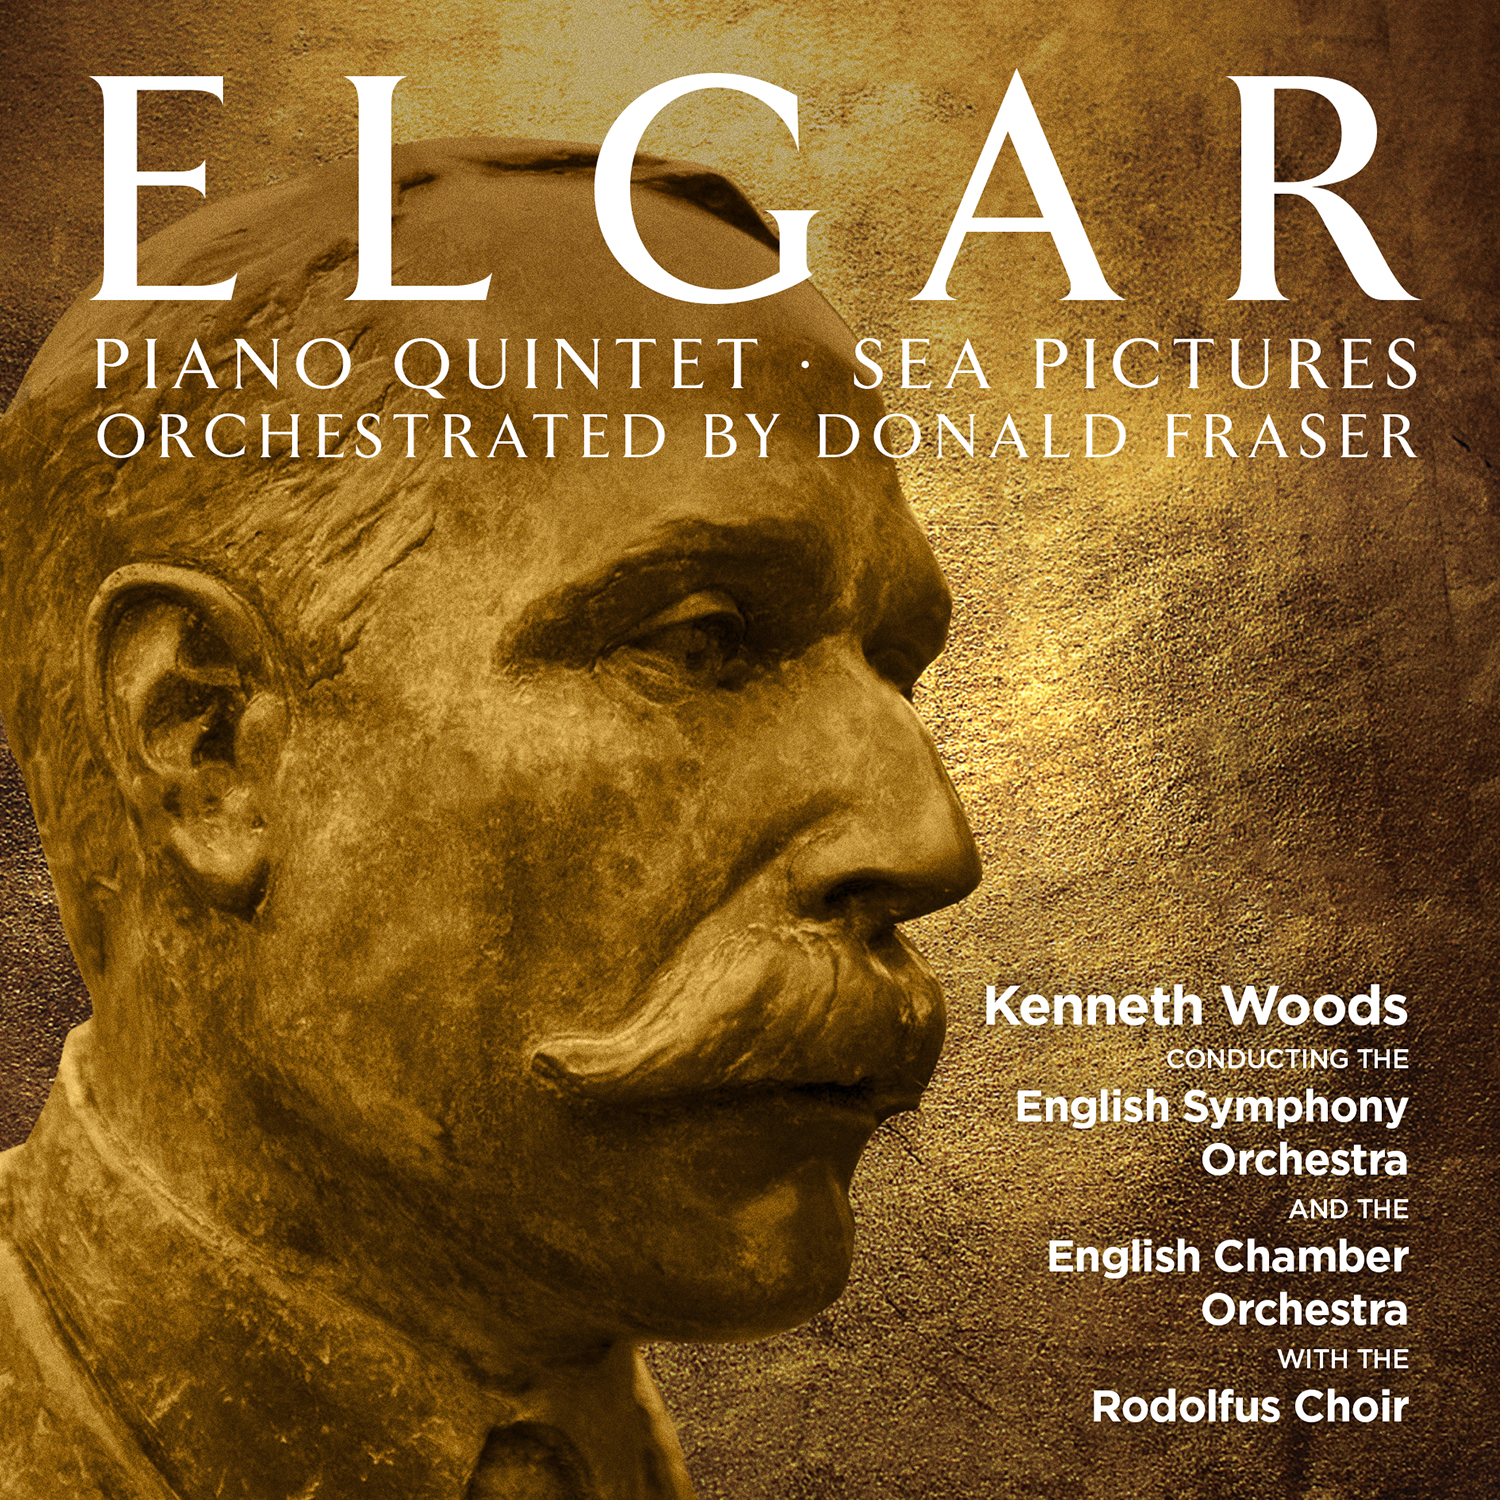 CD Review- BBC Music Magazine on Elgar/Fraser Piano Quintet and Sea Pictures